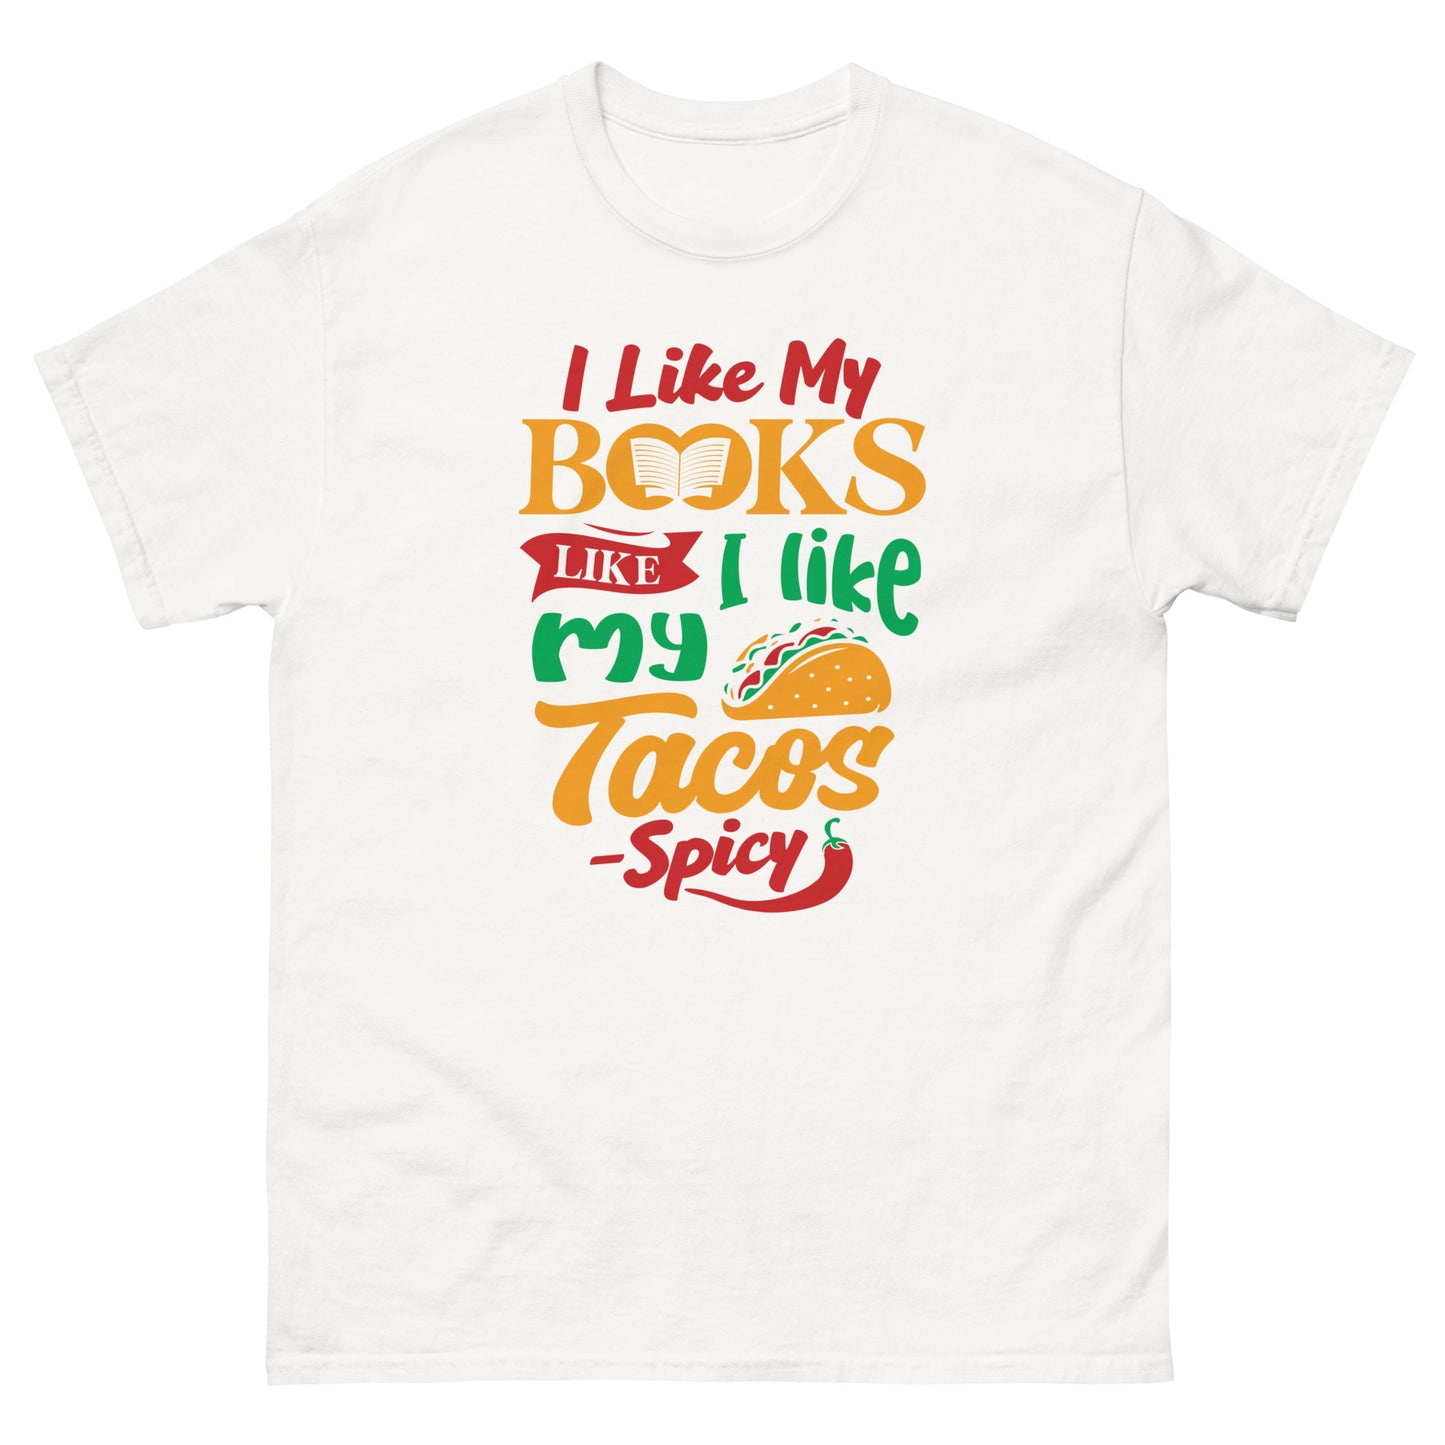 Classic tee - Spicy Tacos